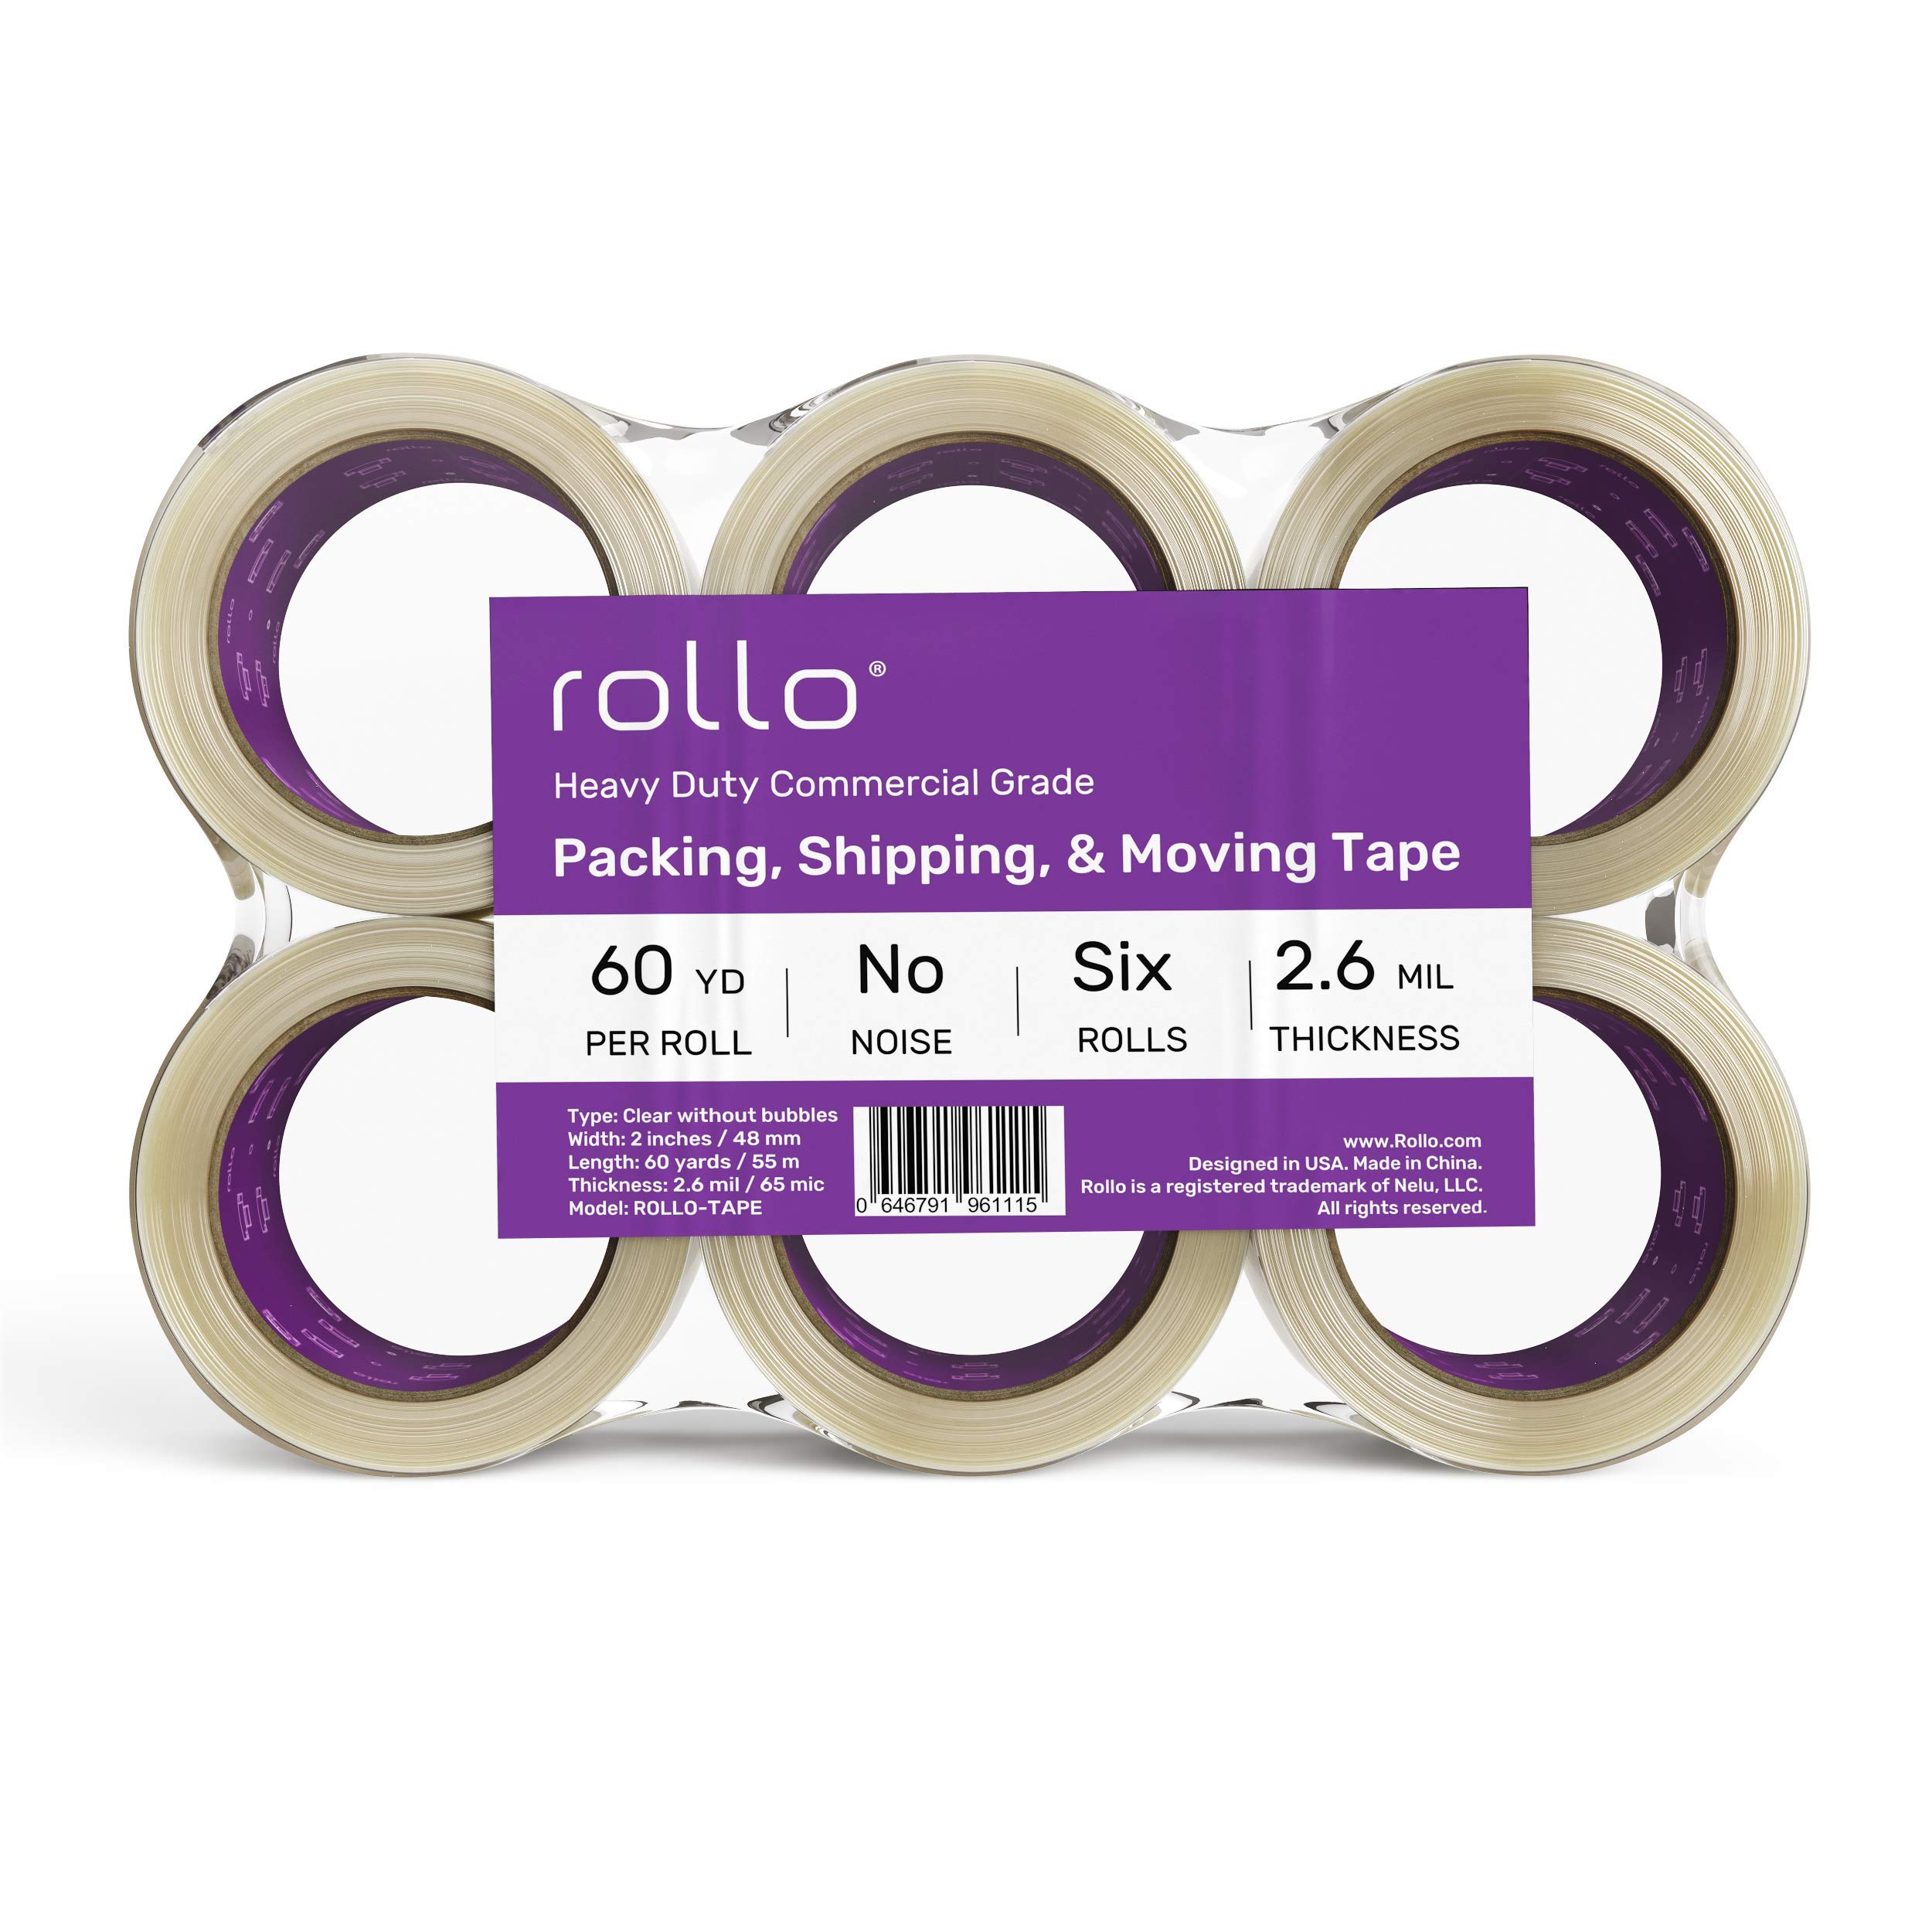 Rollo No Noise Packing Tape - Silent Shipping Tape 60 Yards x 2" Wide x 2.6 Mil Thick (6 Refill Rolls) - Clear Heavy Duty Industrial Quiet Tape for Packaging, Shipping, Moving, Storage with No Bubbles